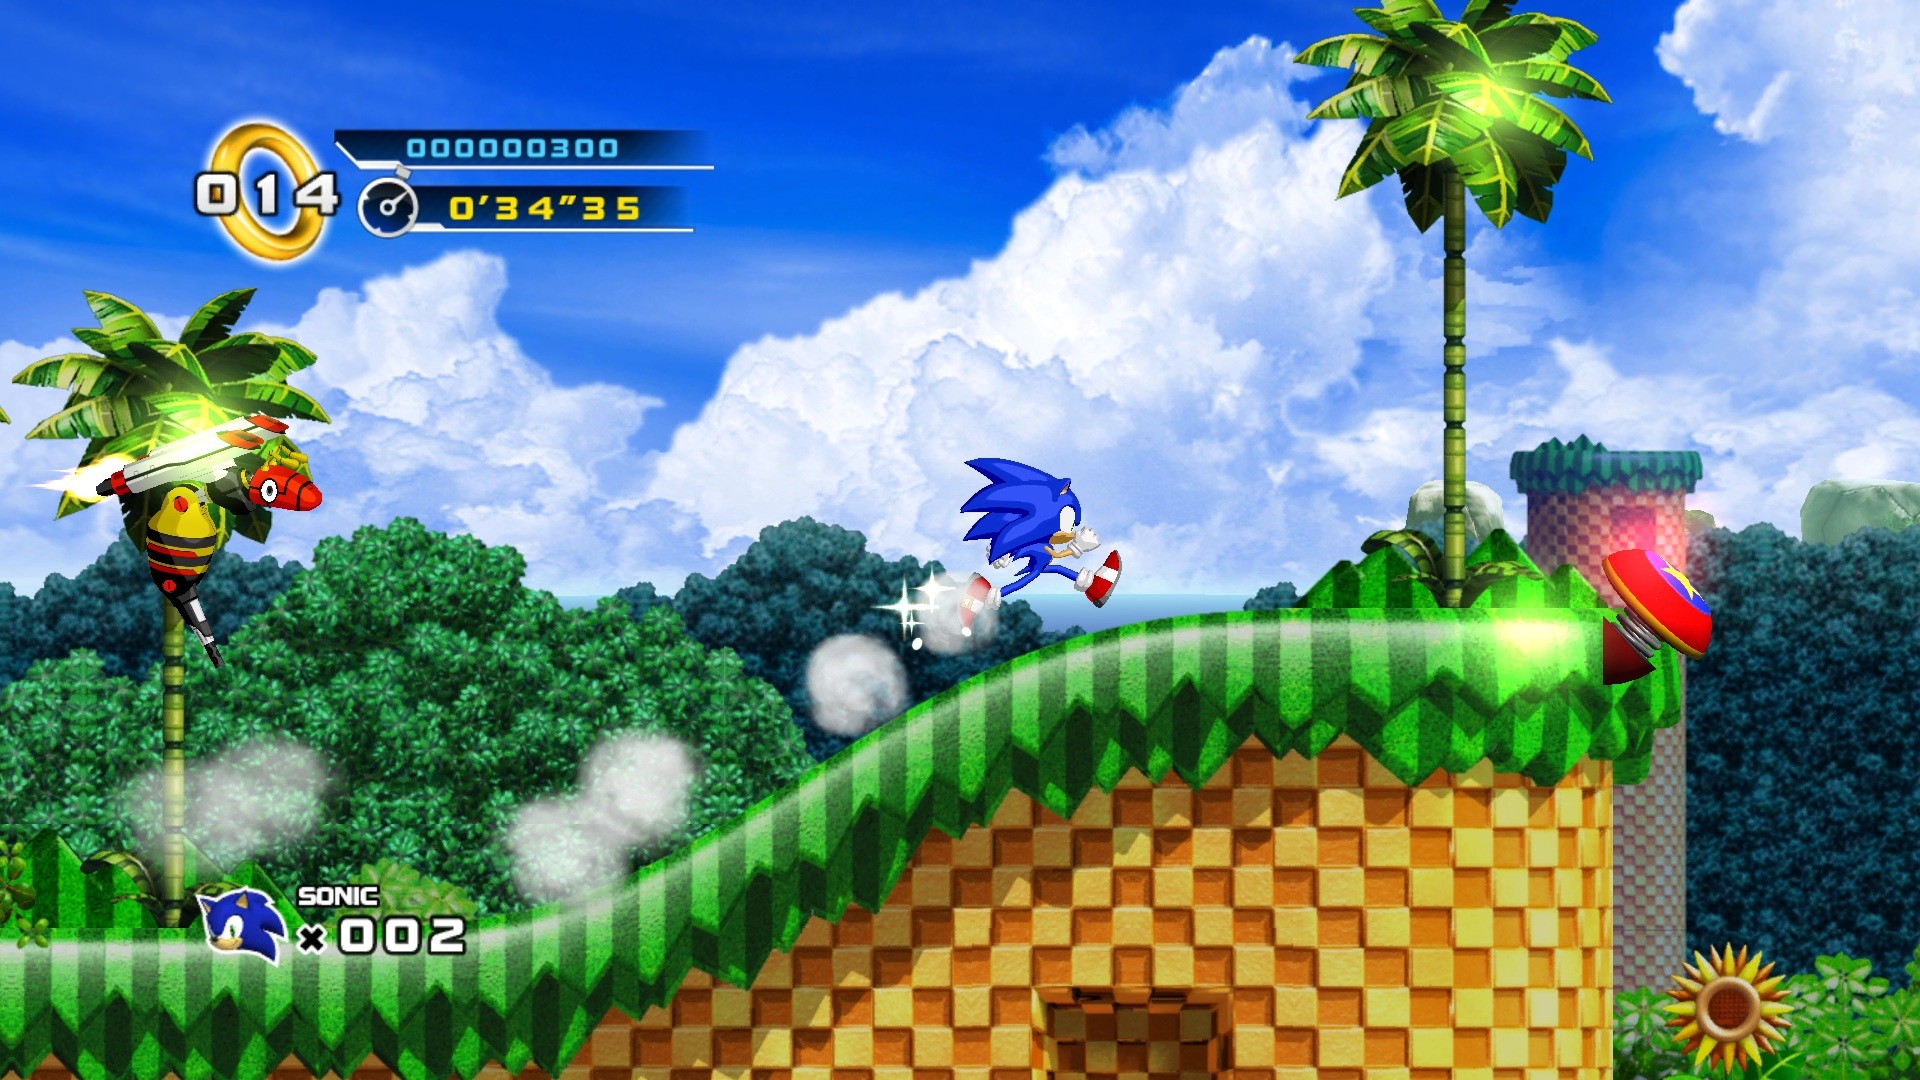 1920x1080 247 Sonic the Hedgehog HD Wallpapers | Backgrounds - Wallpaper Abyss - Page  8